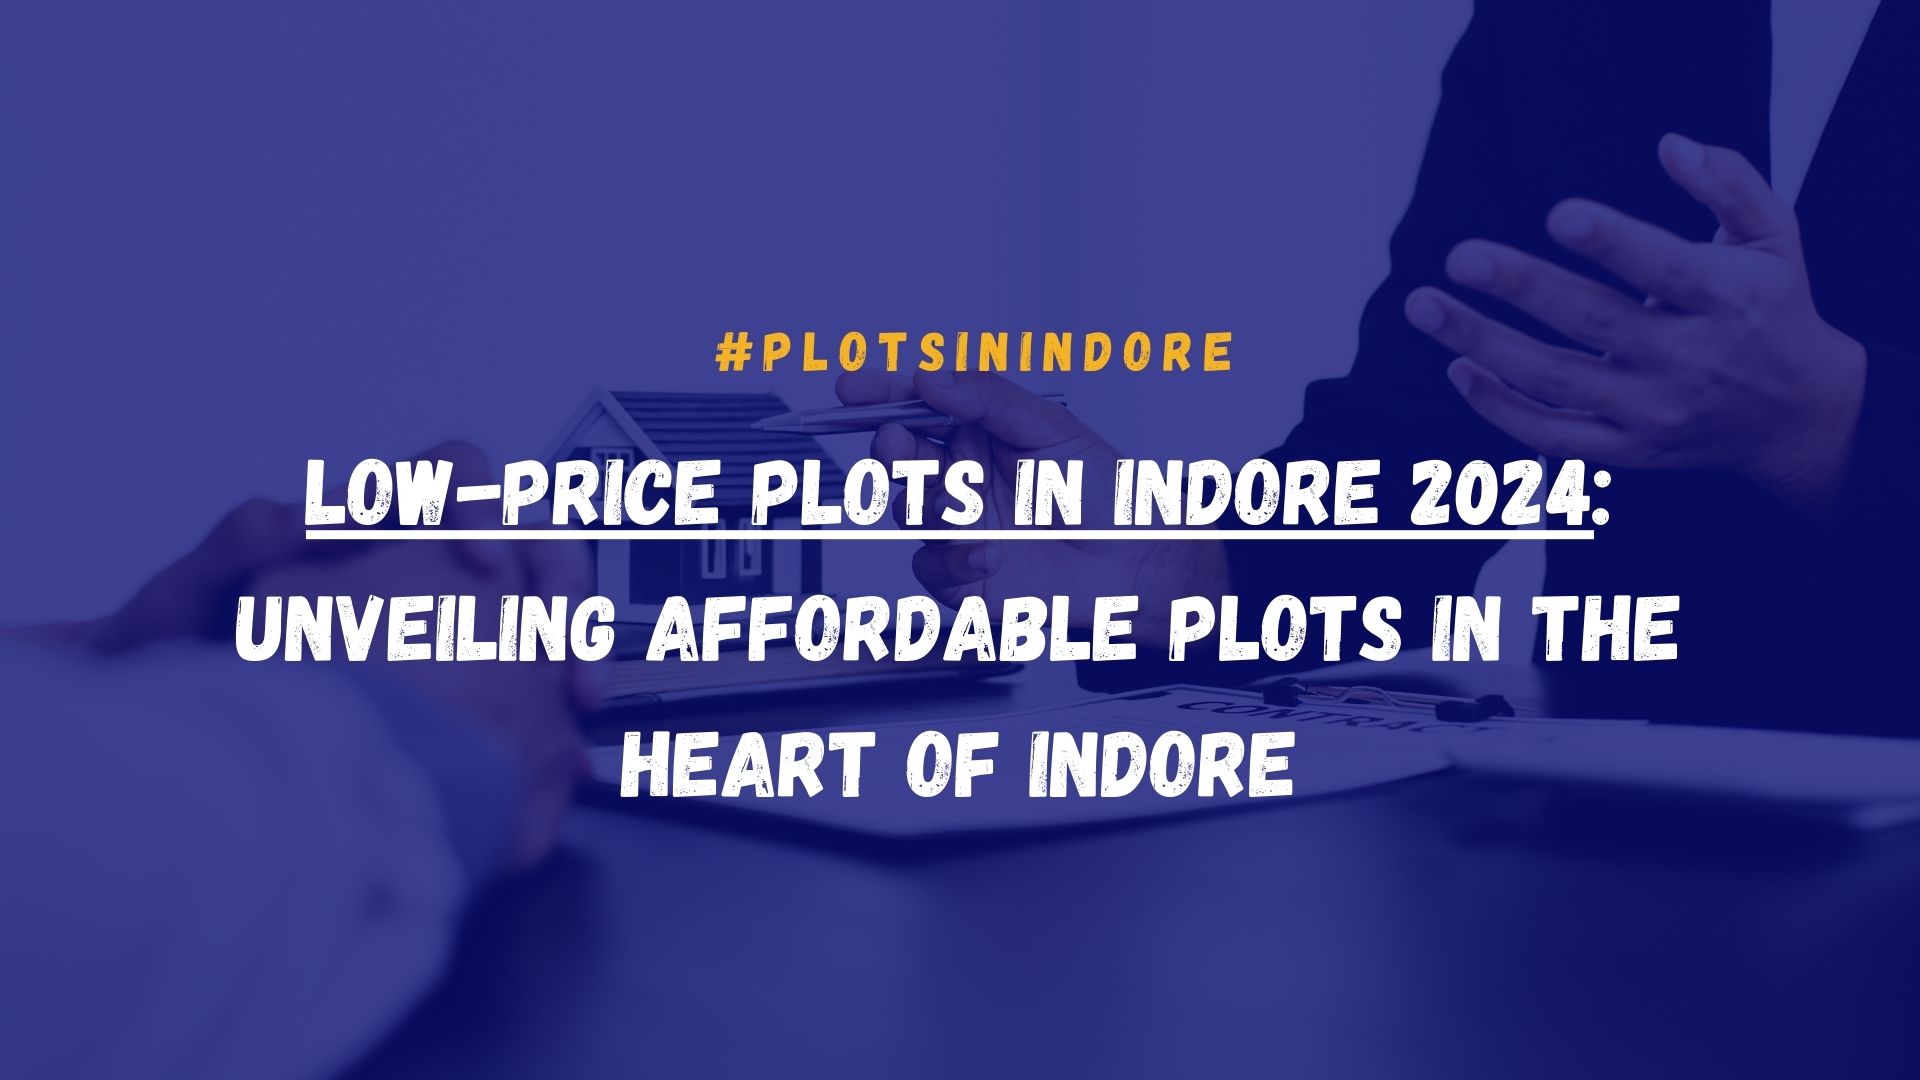 Background image with a blue overlay featuring text that reads 'Low Price Plots in Indore 2024: Unveiling Affordable Plots in the Heart of Indore.